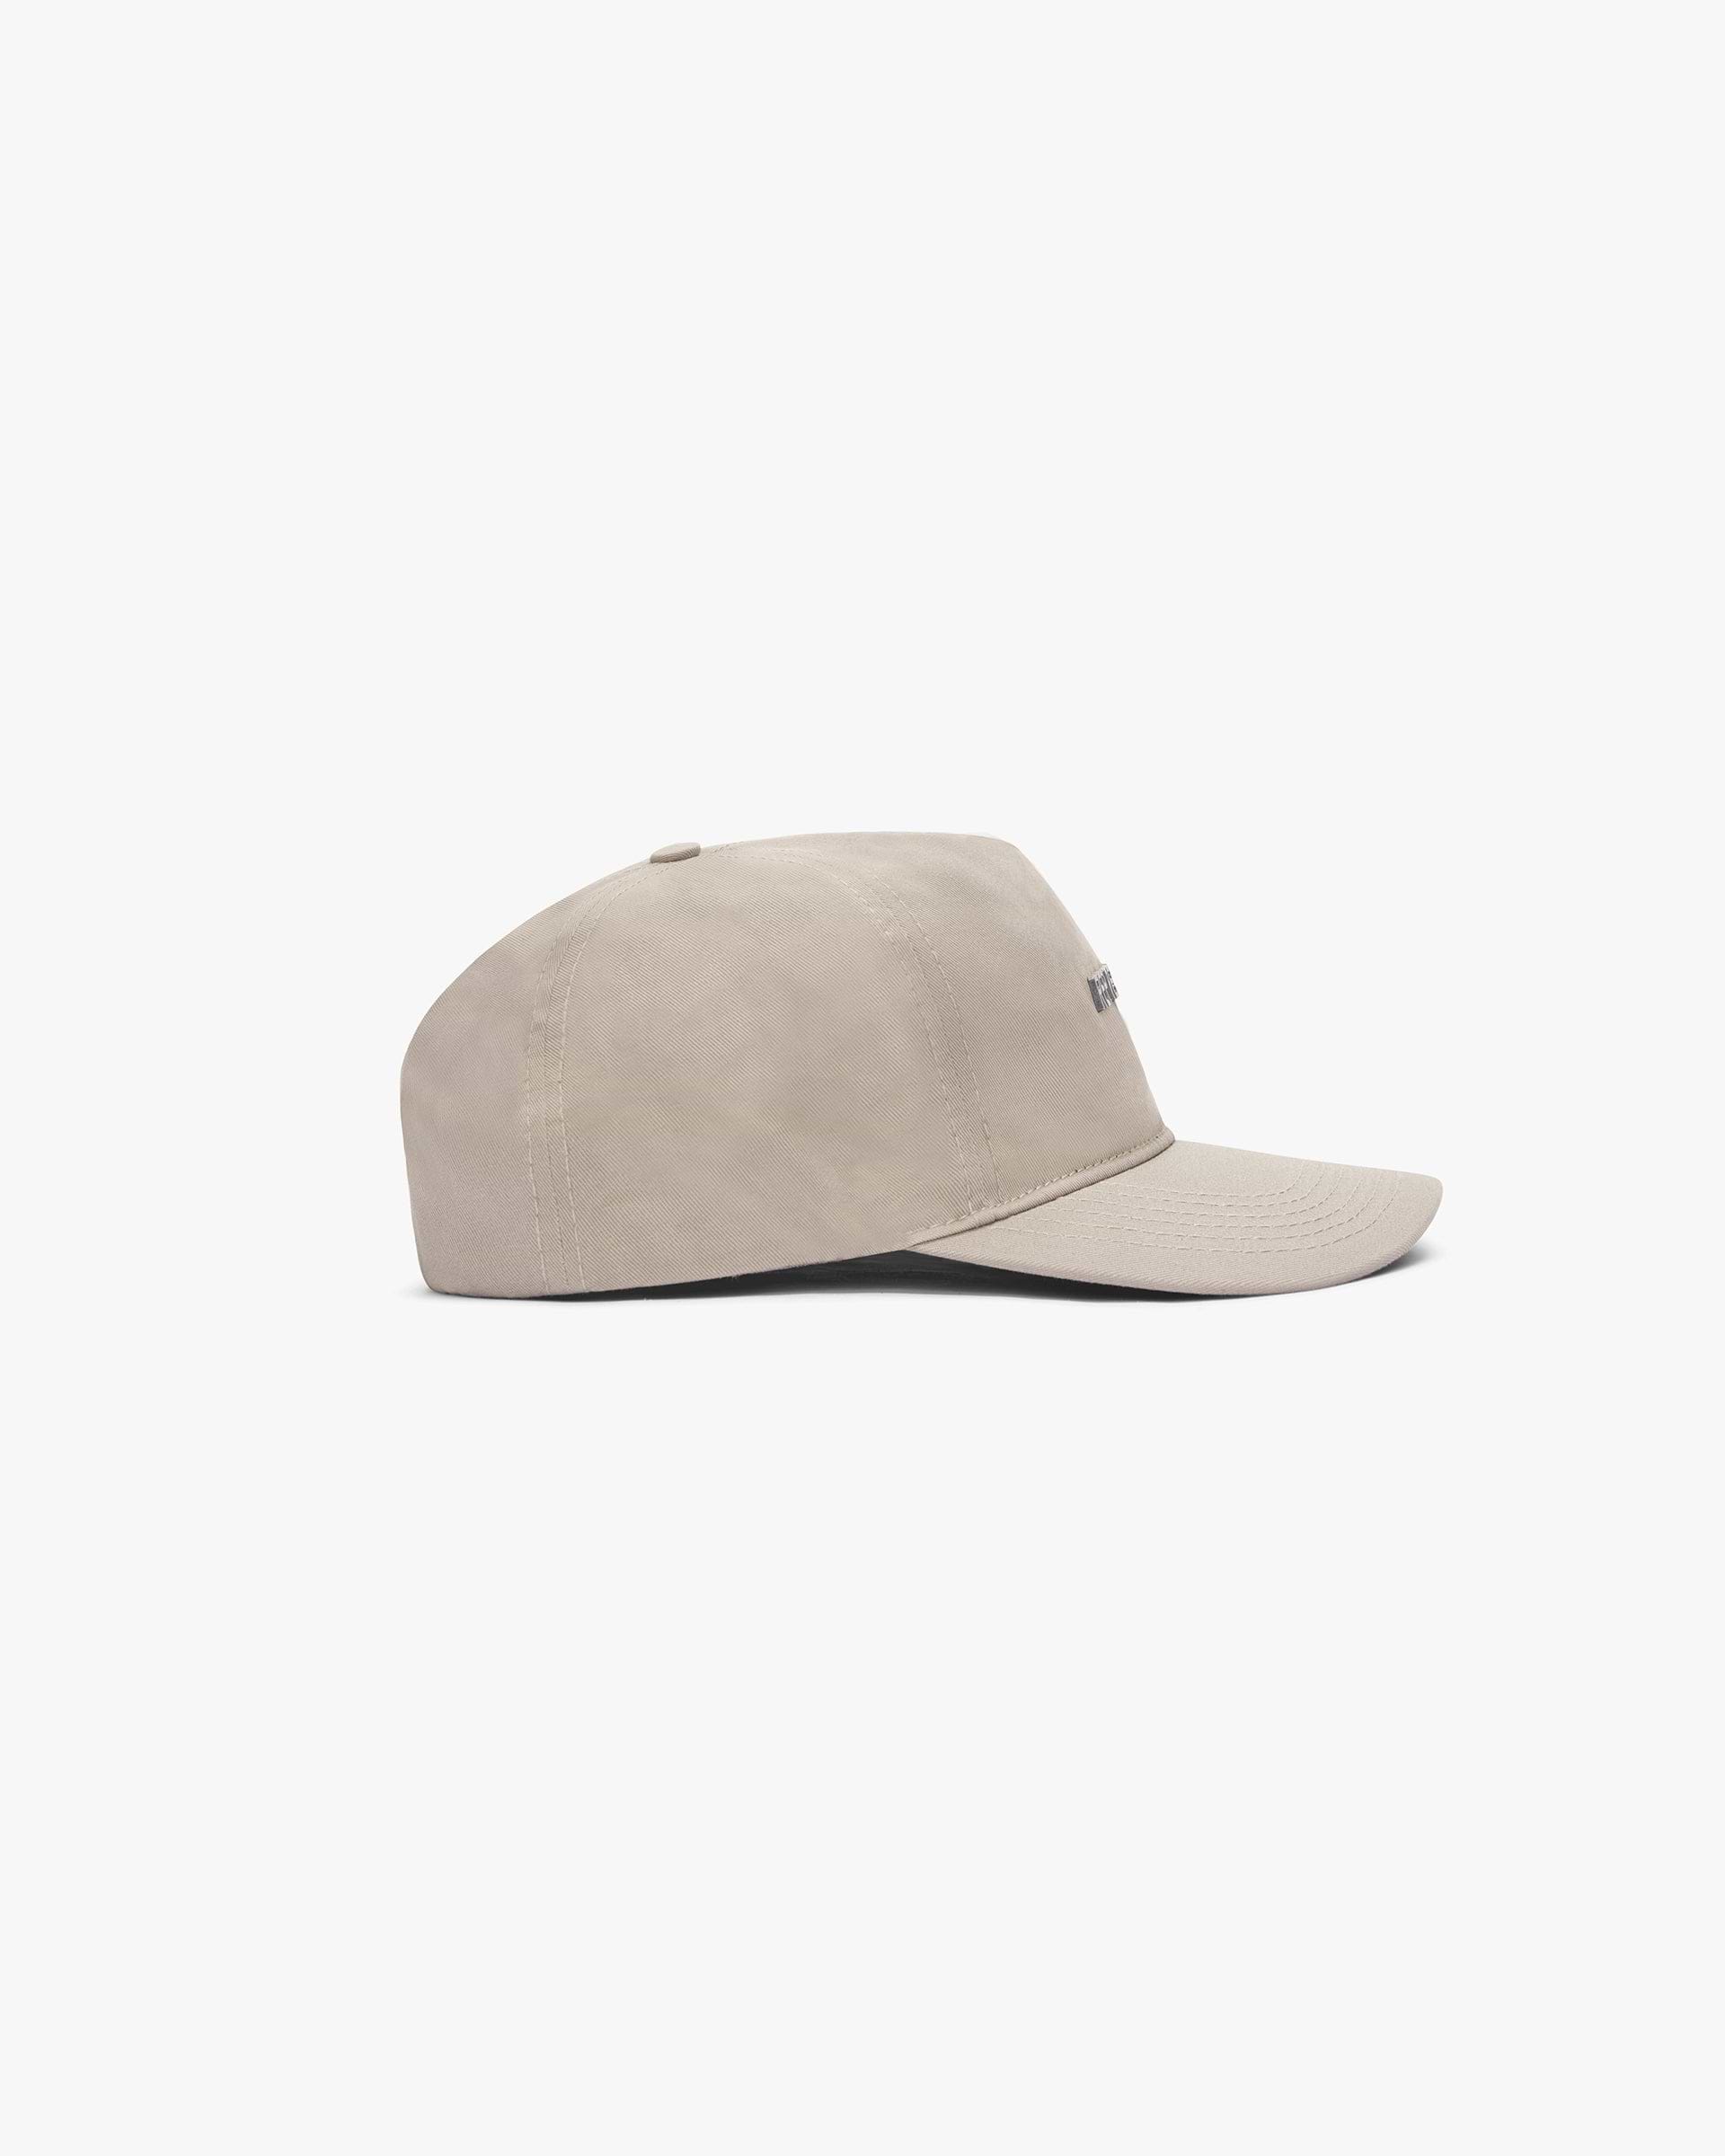 Represent Cap - Washed Taupe